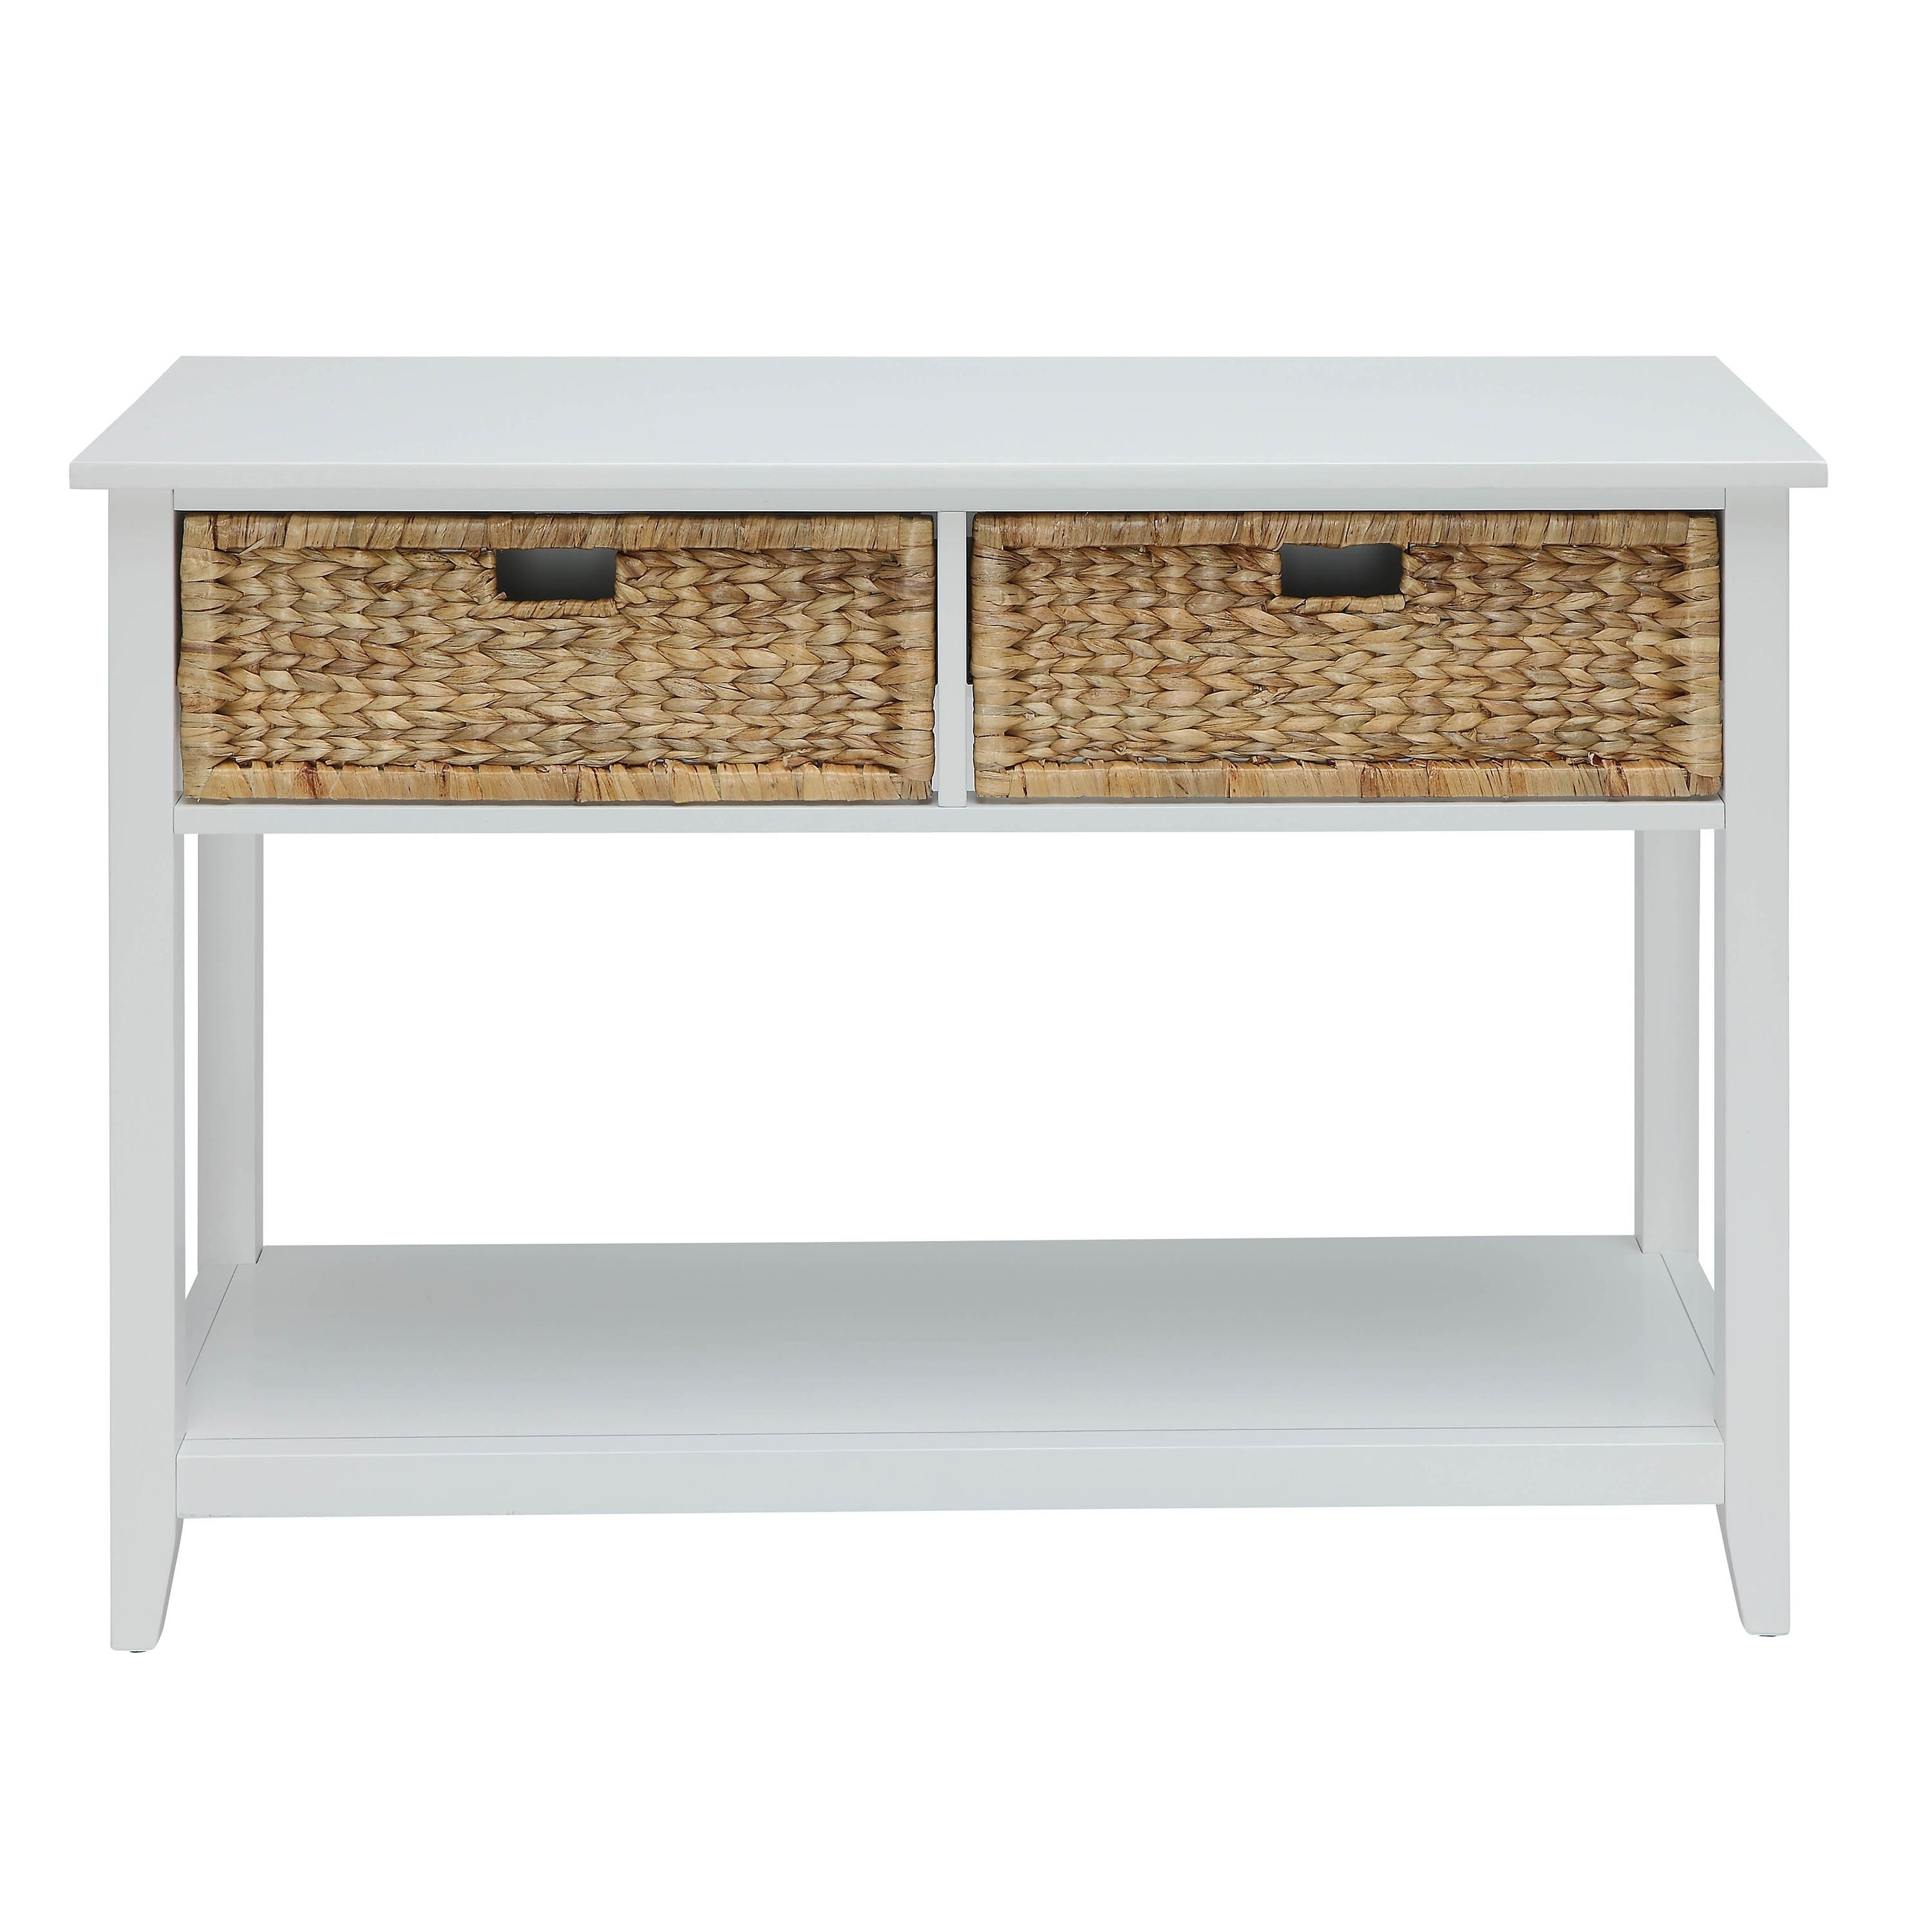 https://ak1.ostkcdn.com/images/products/28587090/Urban-Designs-Console-Table-With-Two-Basket-like-Front-Drawers-White-298a5d7e-9a39-4d81-a67c-b1067fb254b6.jpg